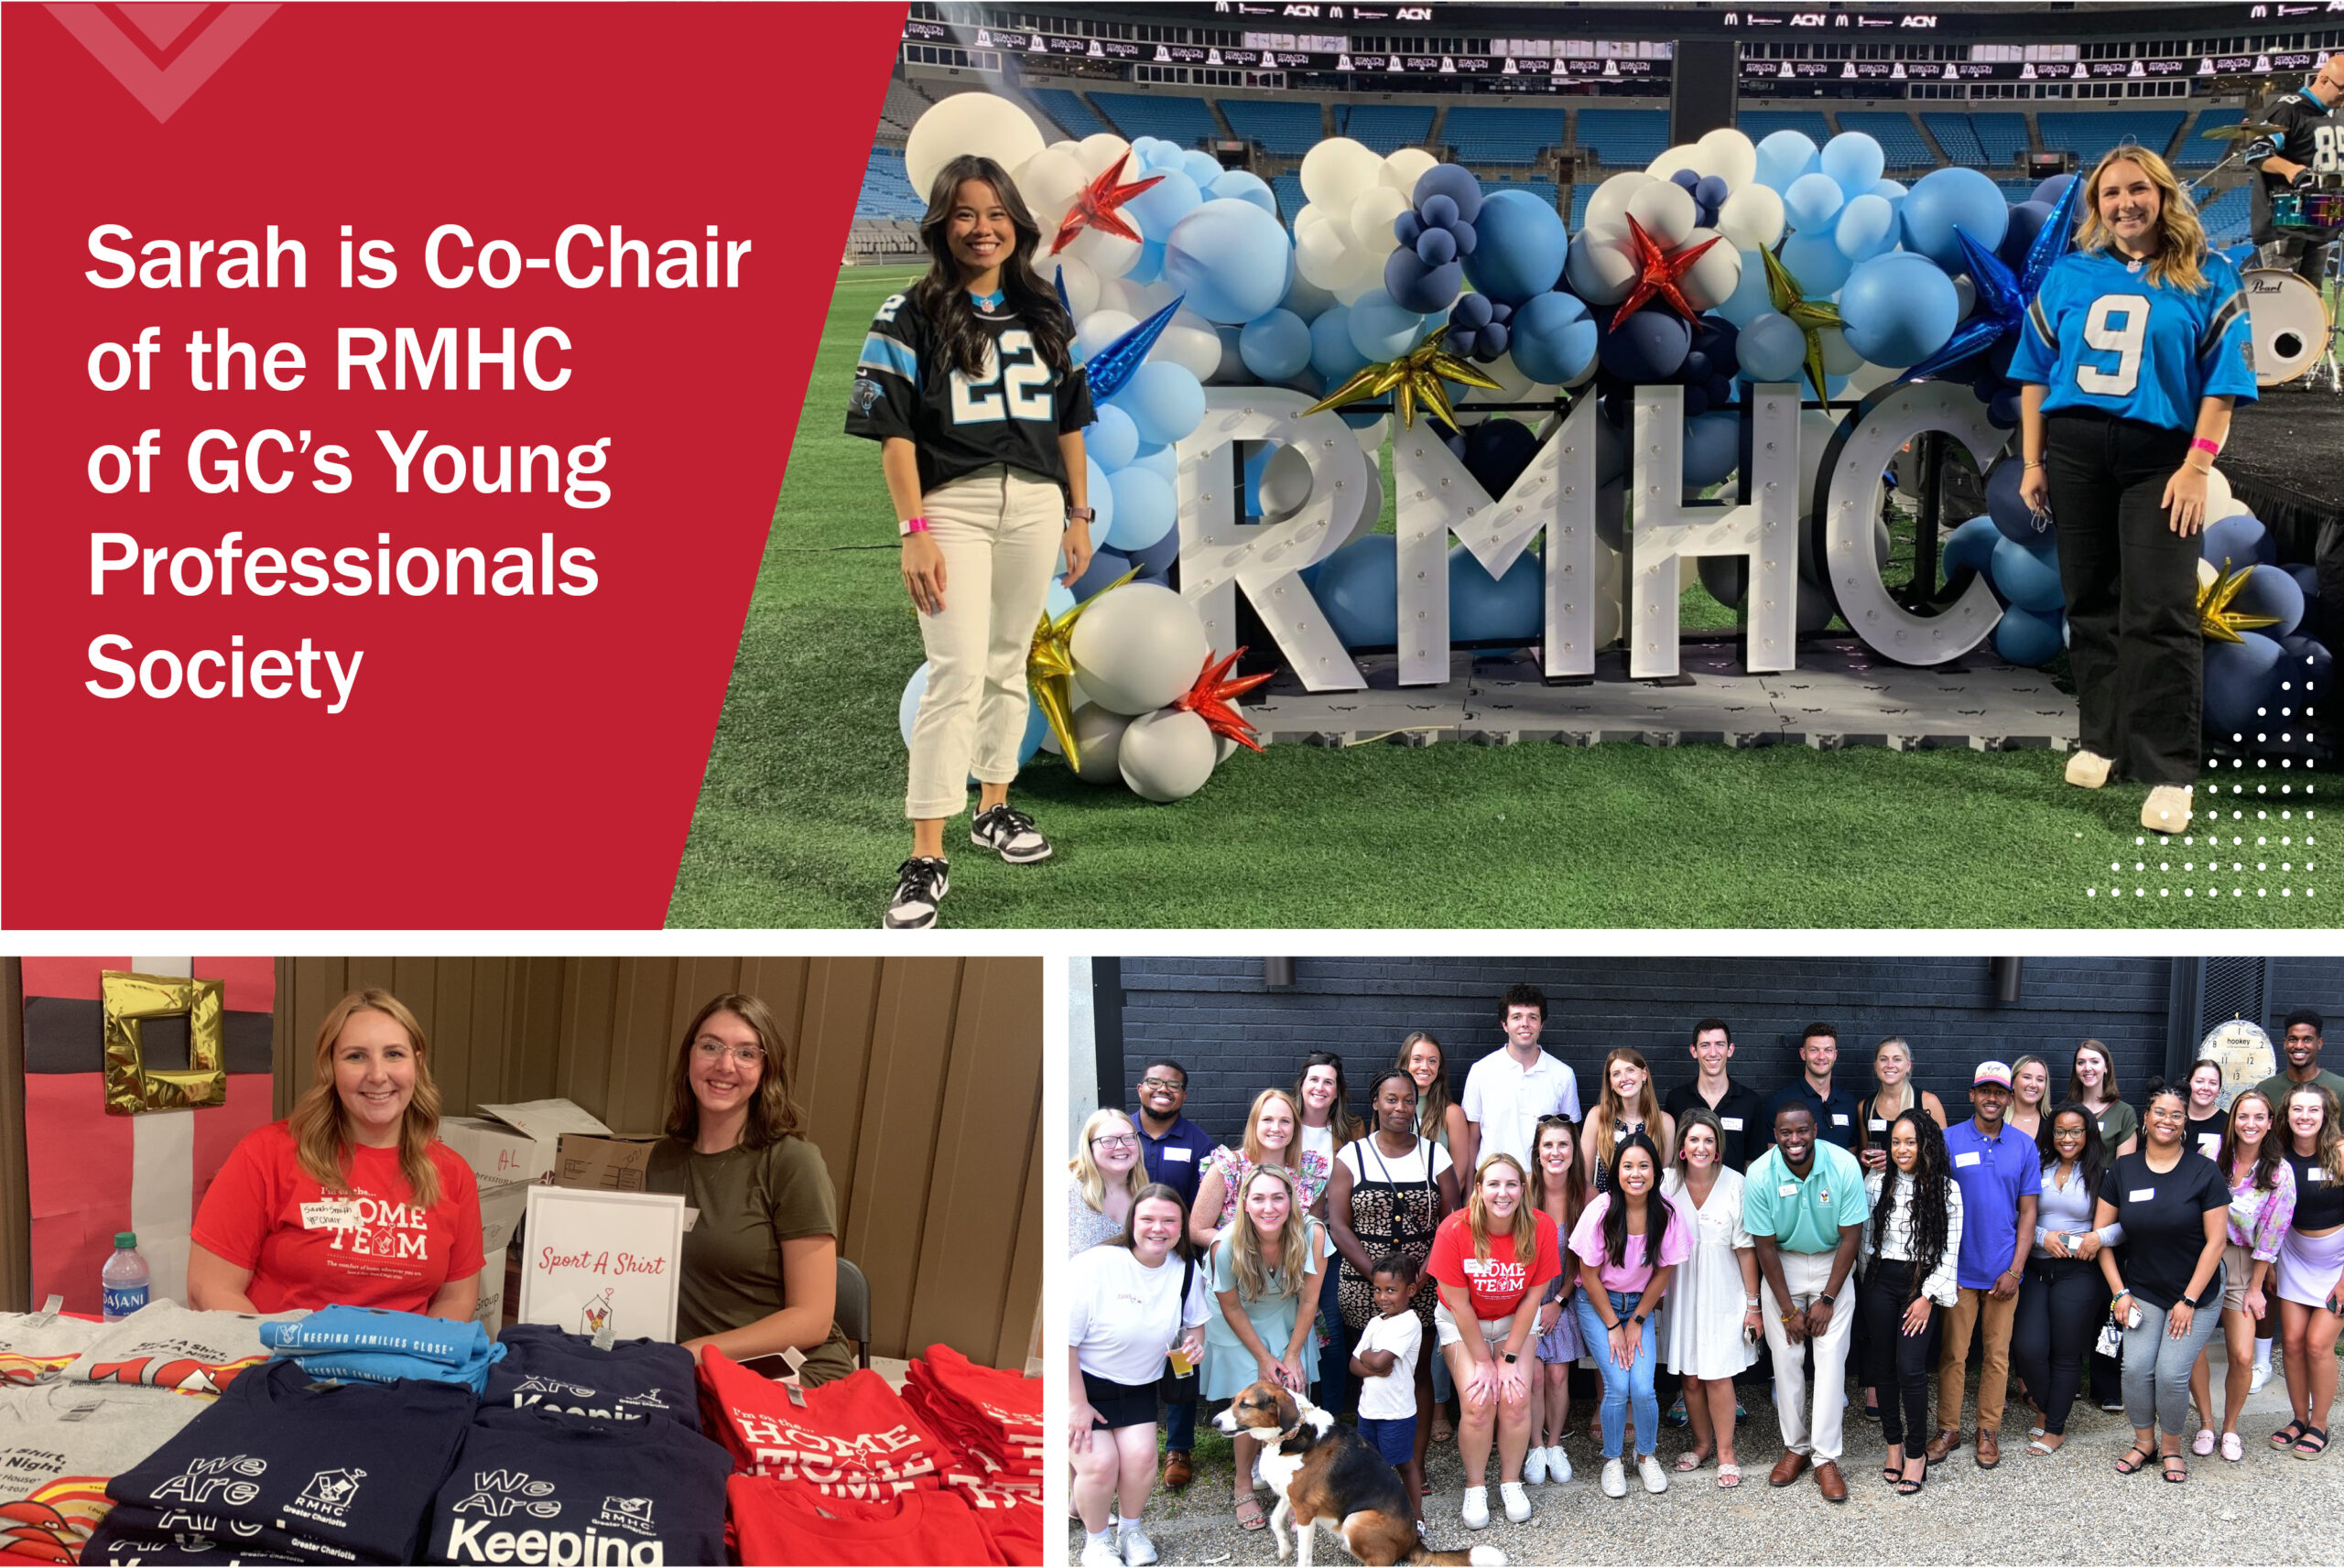 Community Engagement: Sarah is co-chair of the RMHC of GC's Young Professionals Society.